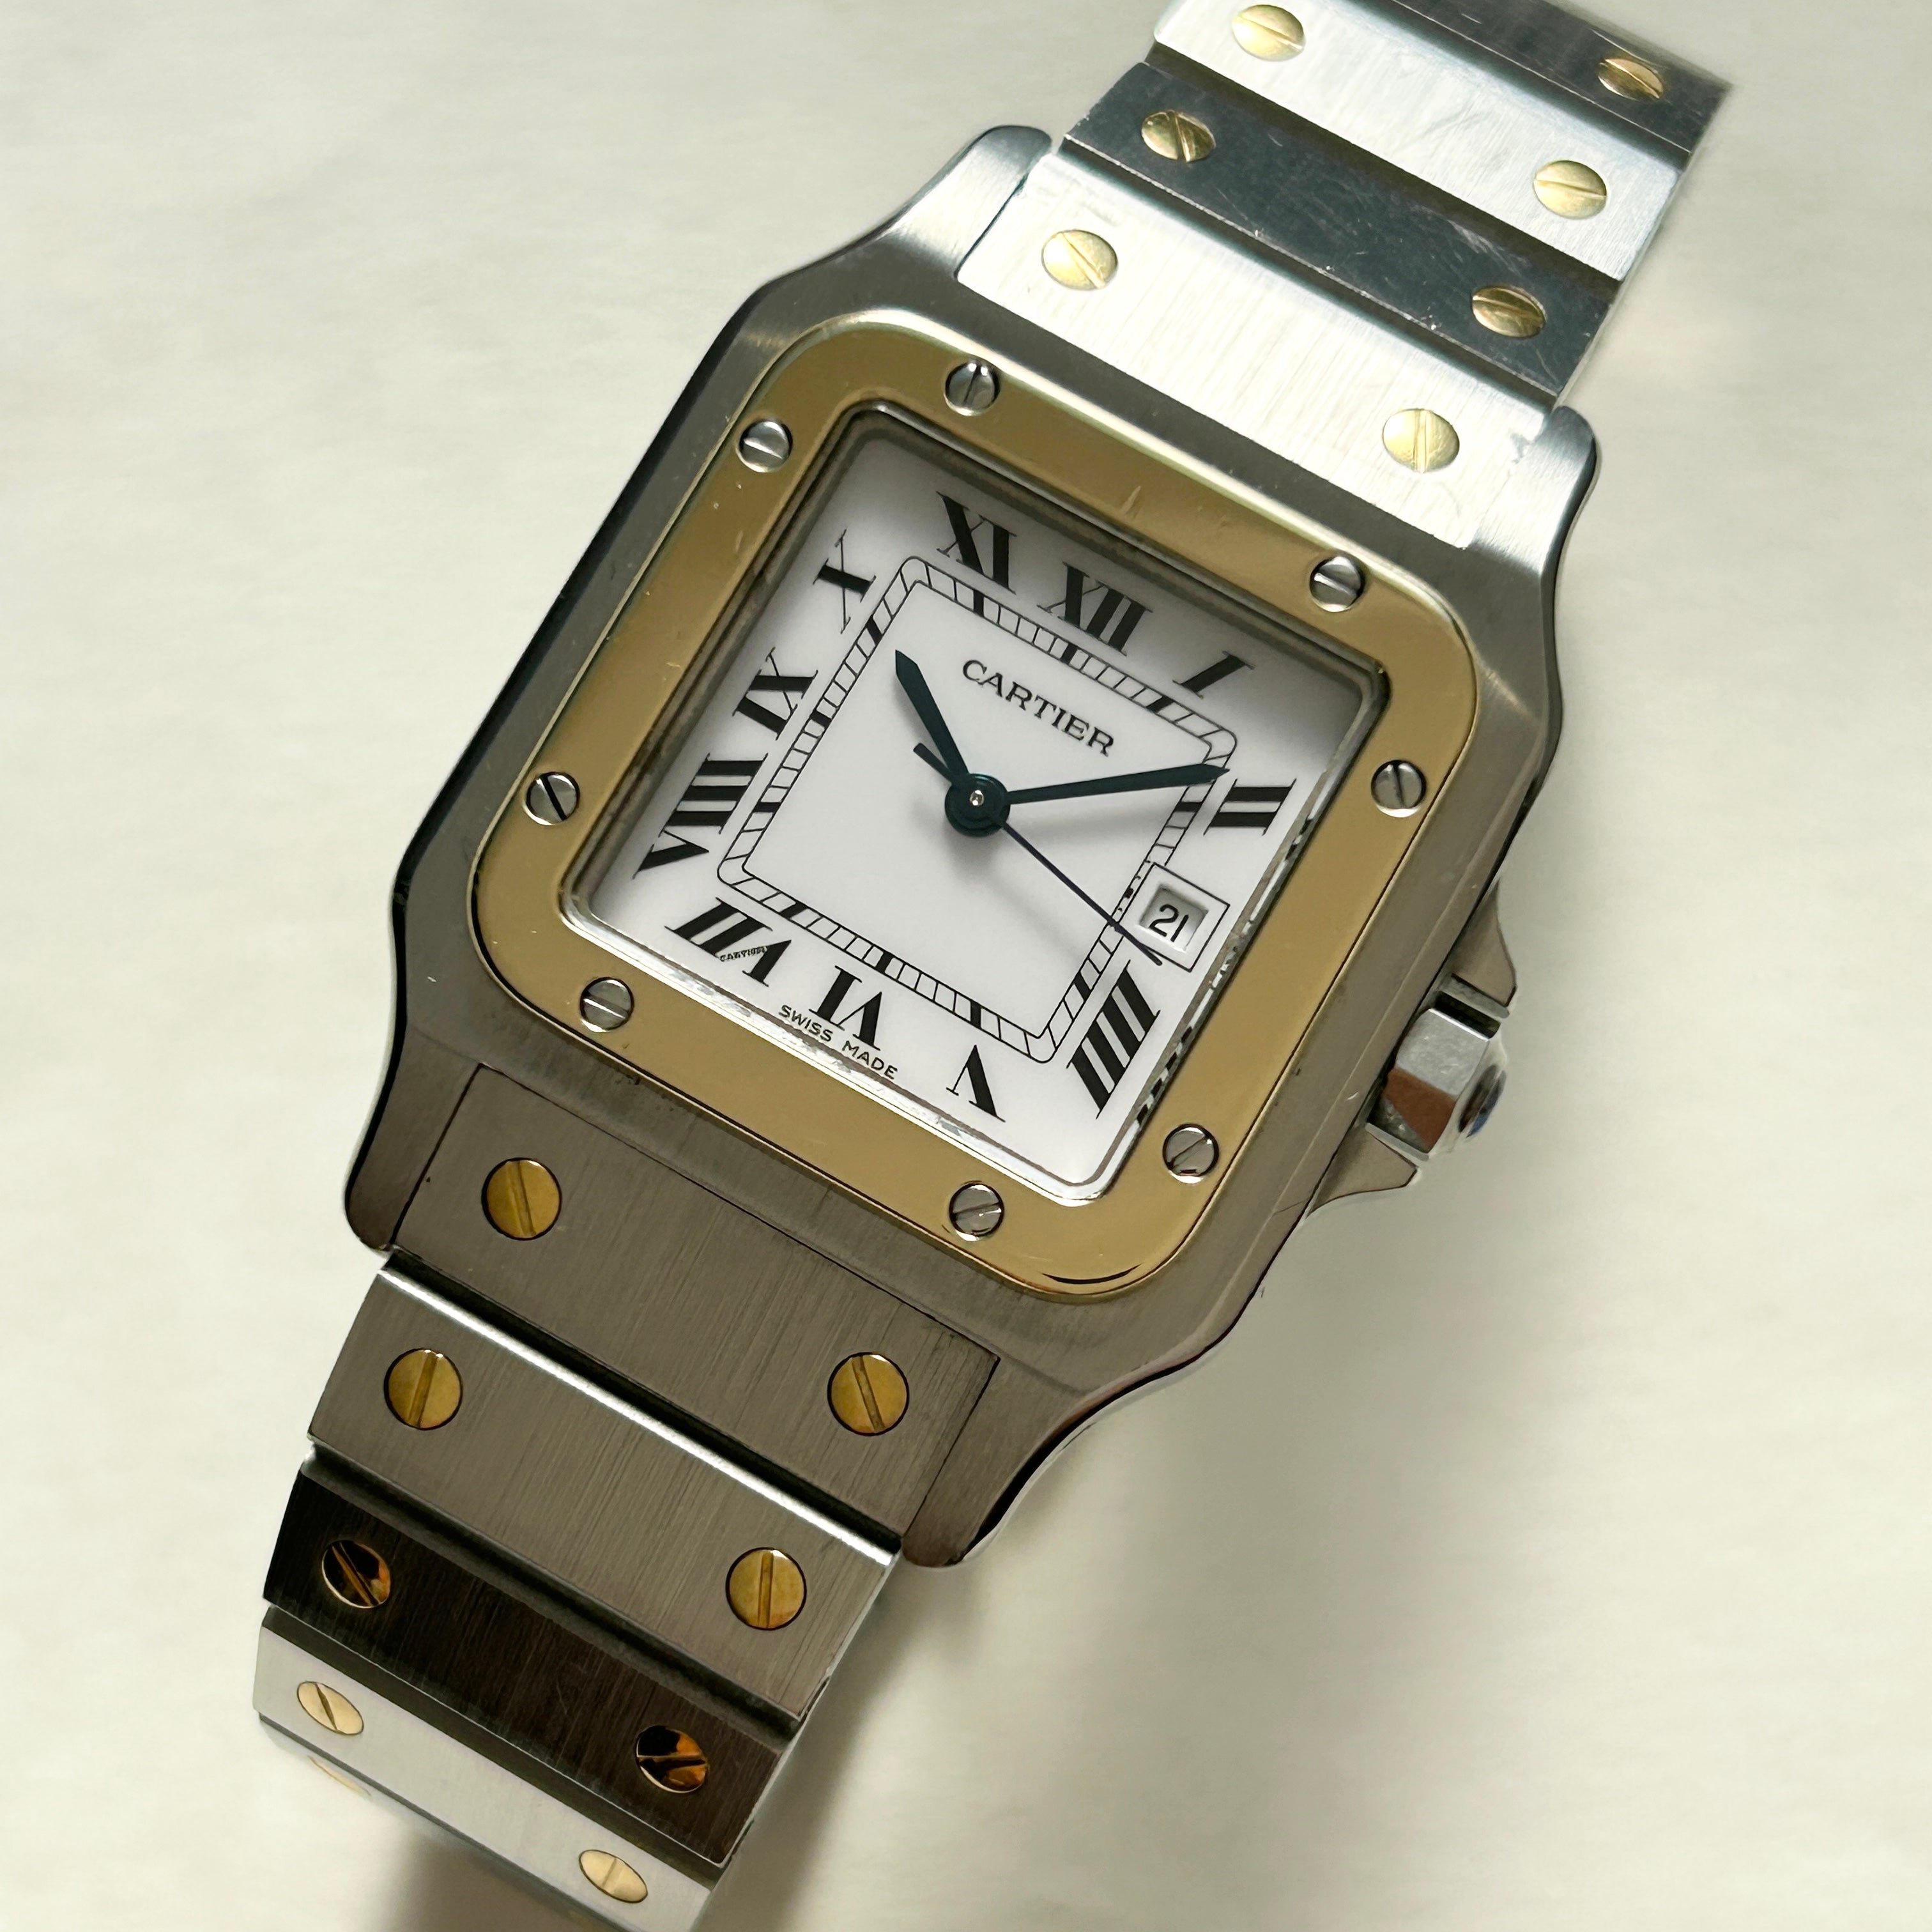 【Cartier】サントスガルベLMコンビ 純正ボックス付き